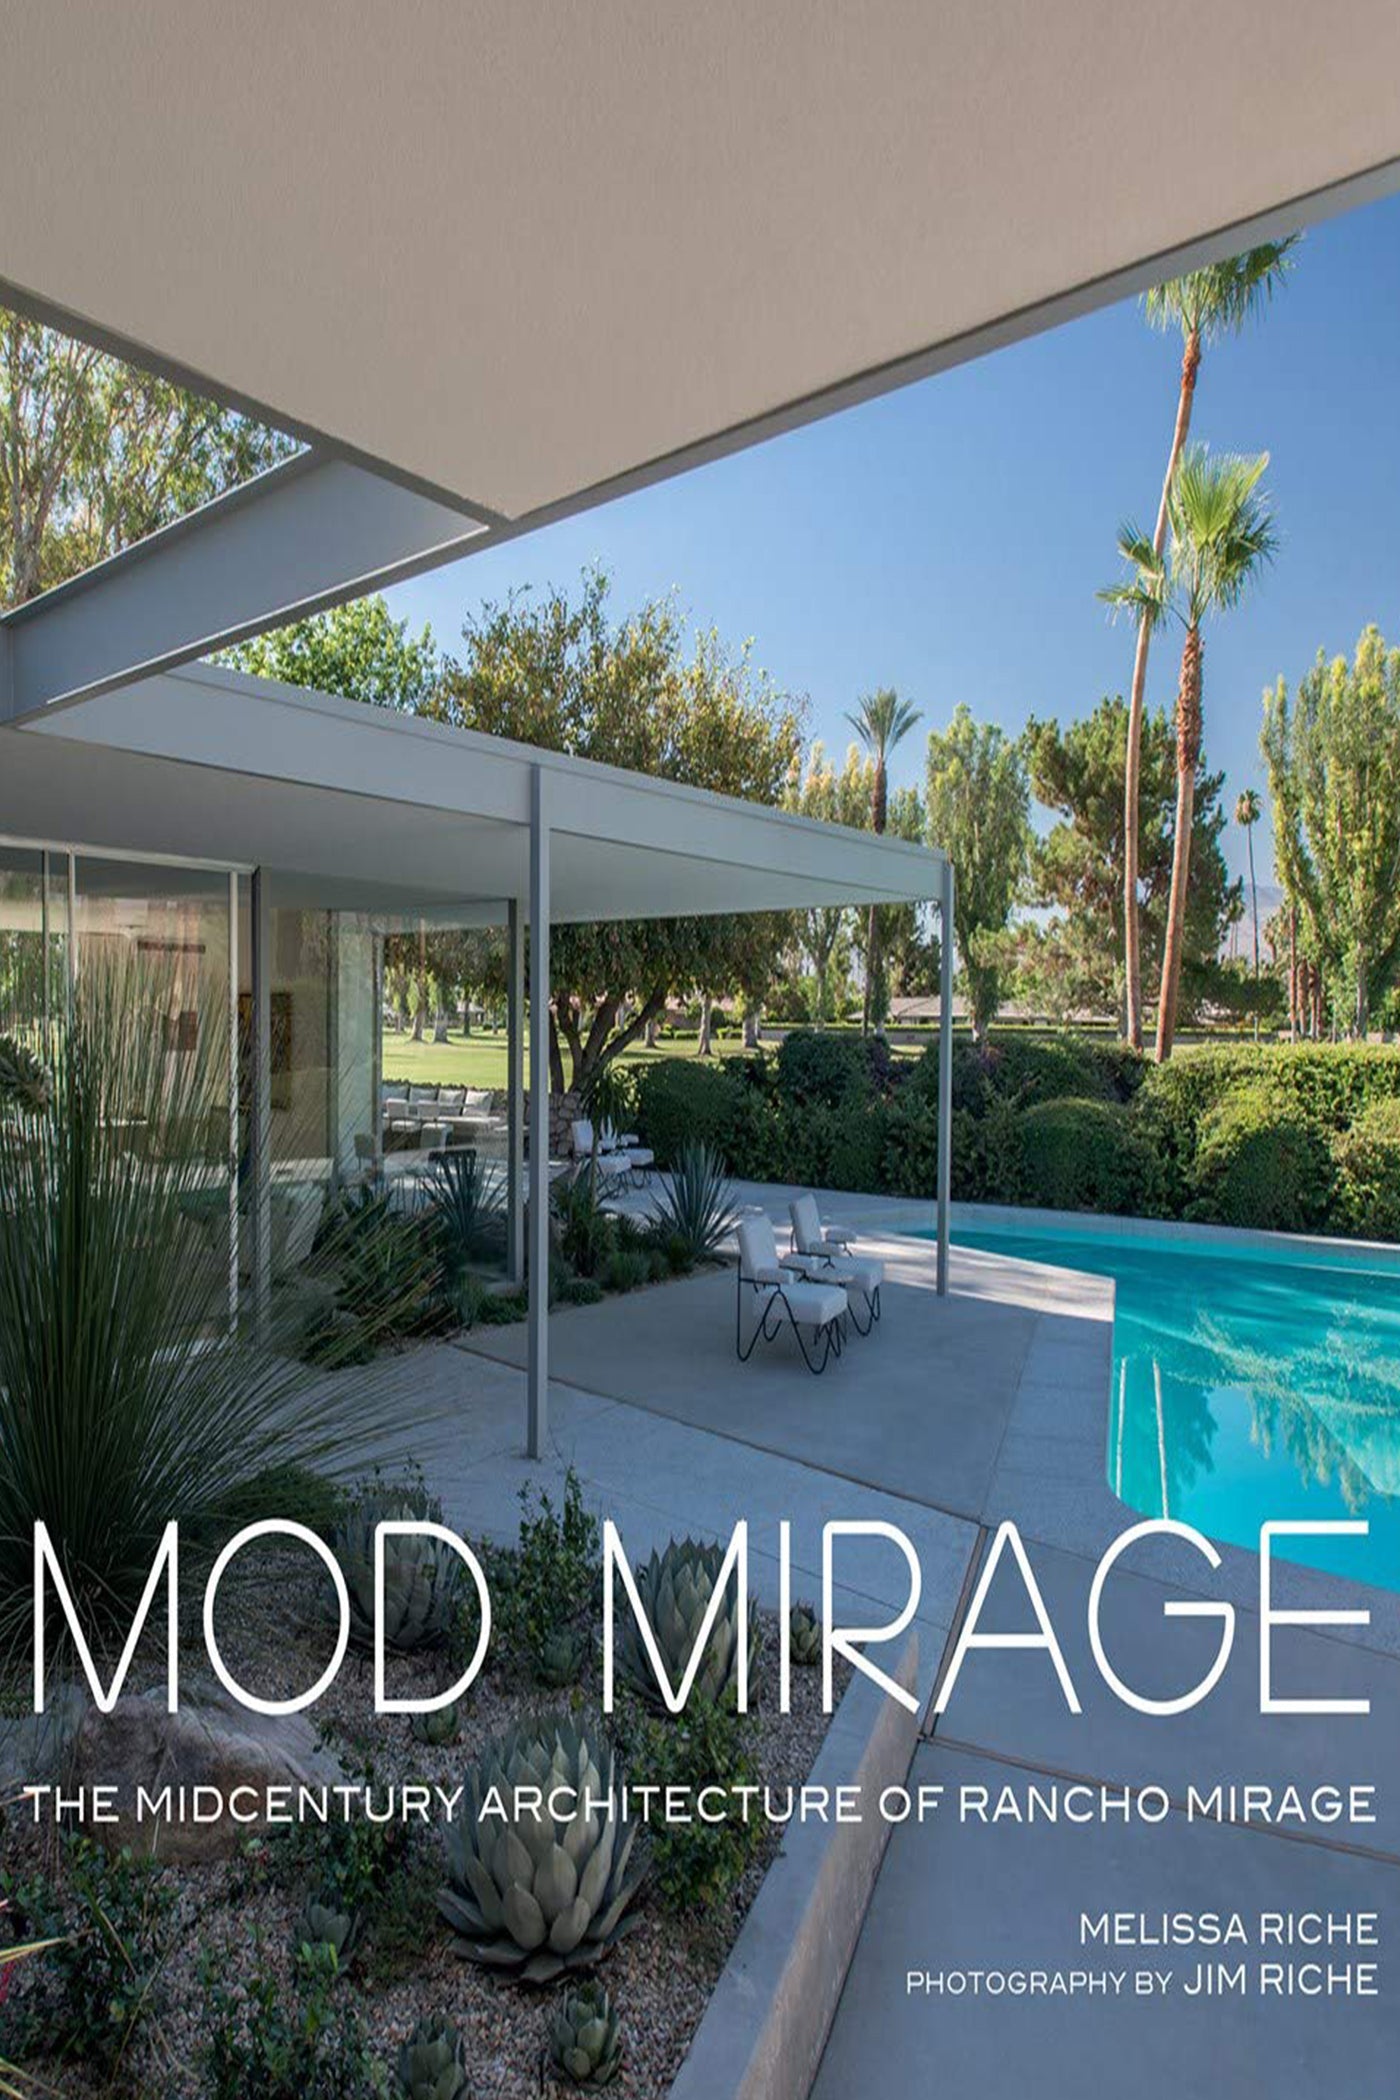 Mod Mirage: The Midcentury Architecture of Rancho Mirage Book